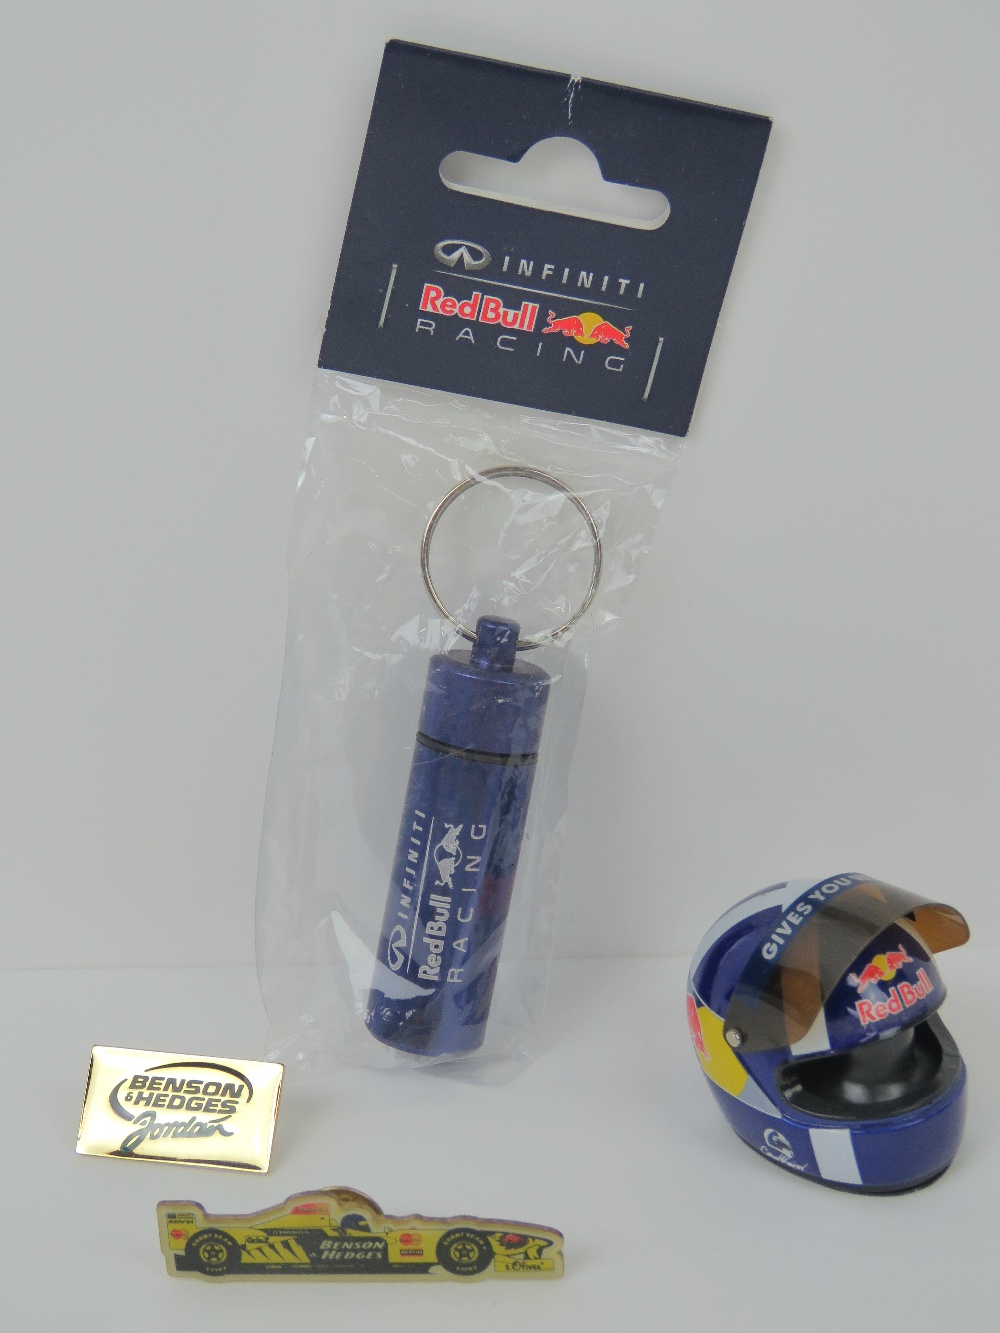 A David Coulthard mini helmet unboxed, together with some Red Bull Racing ear plugs,